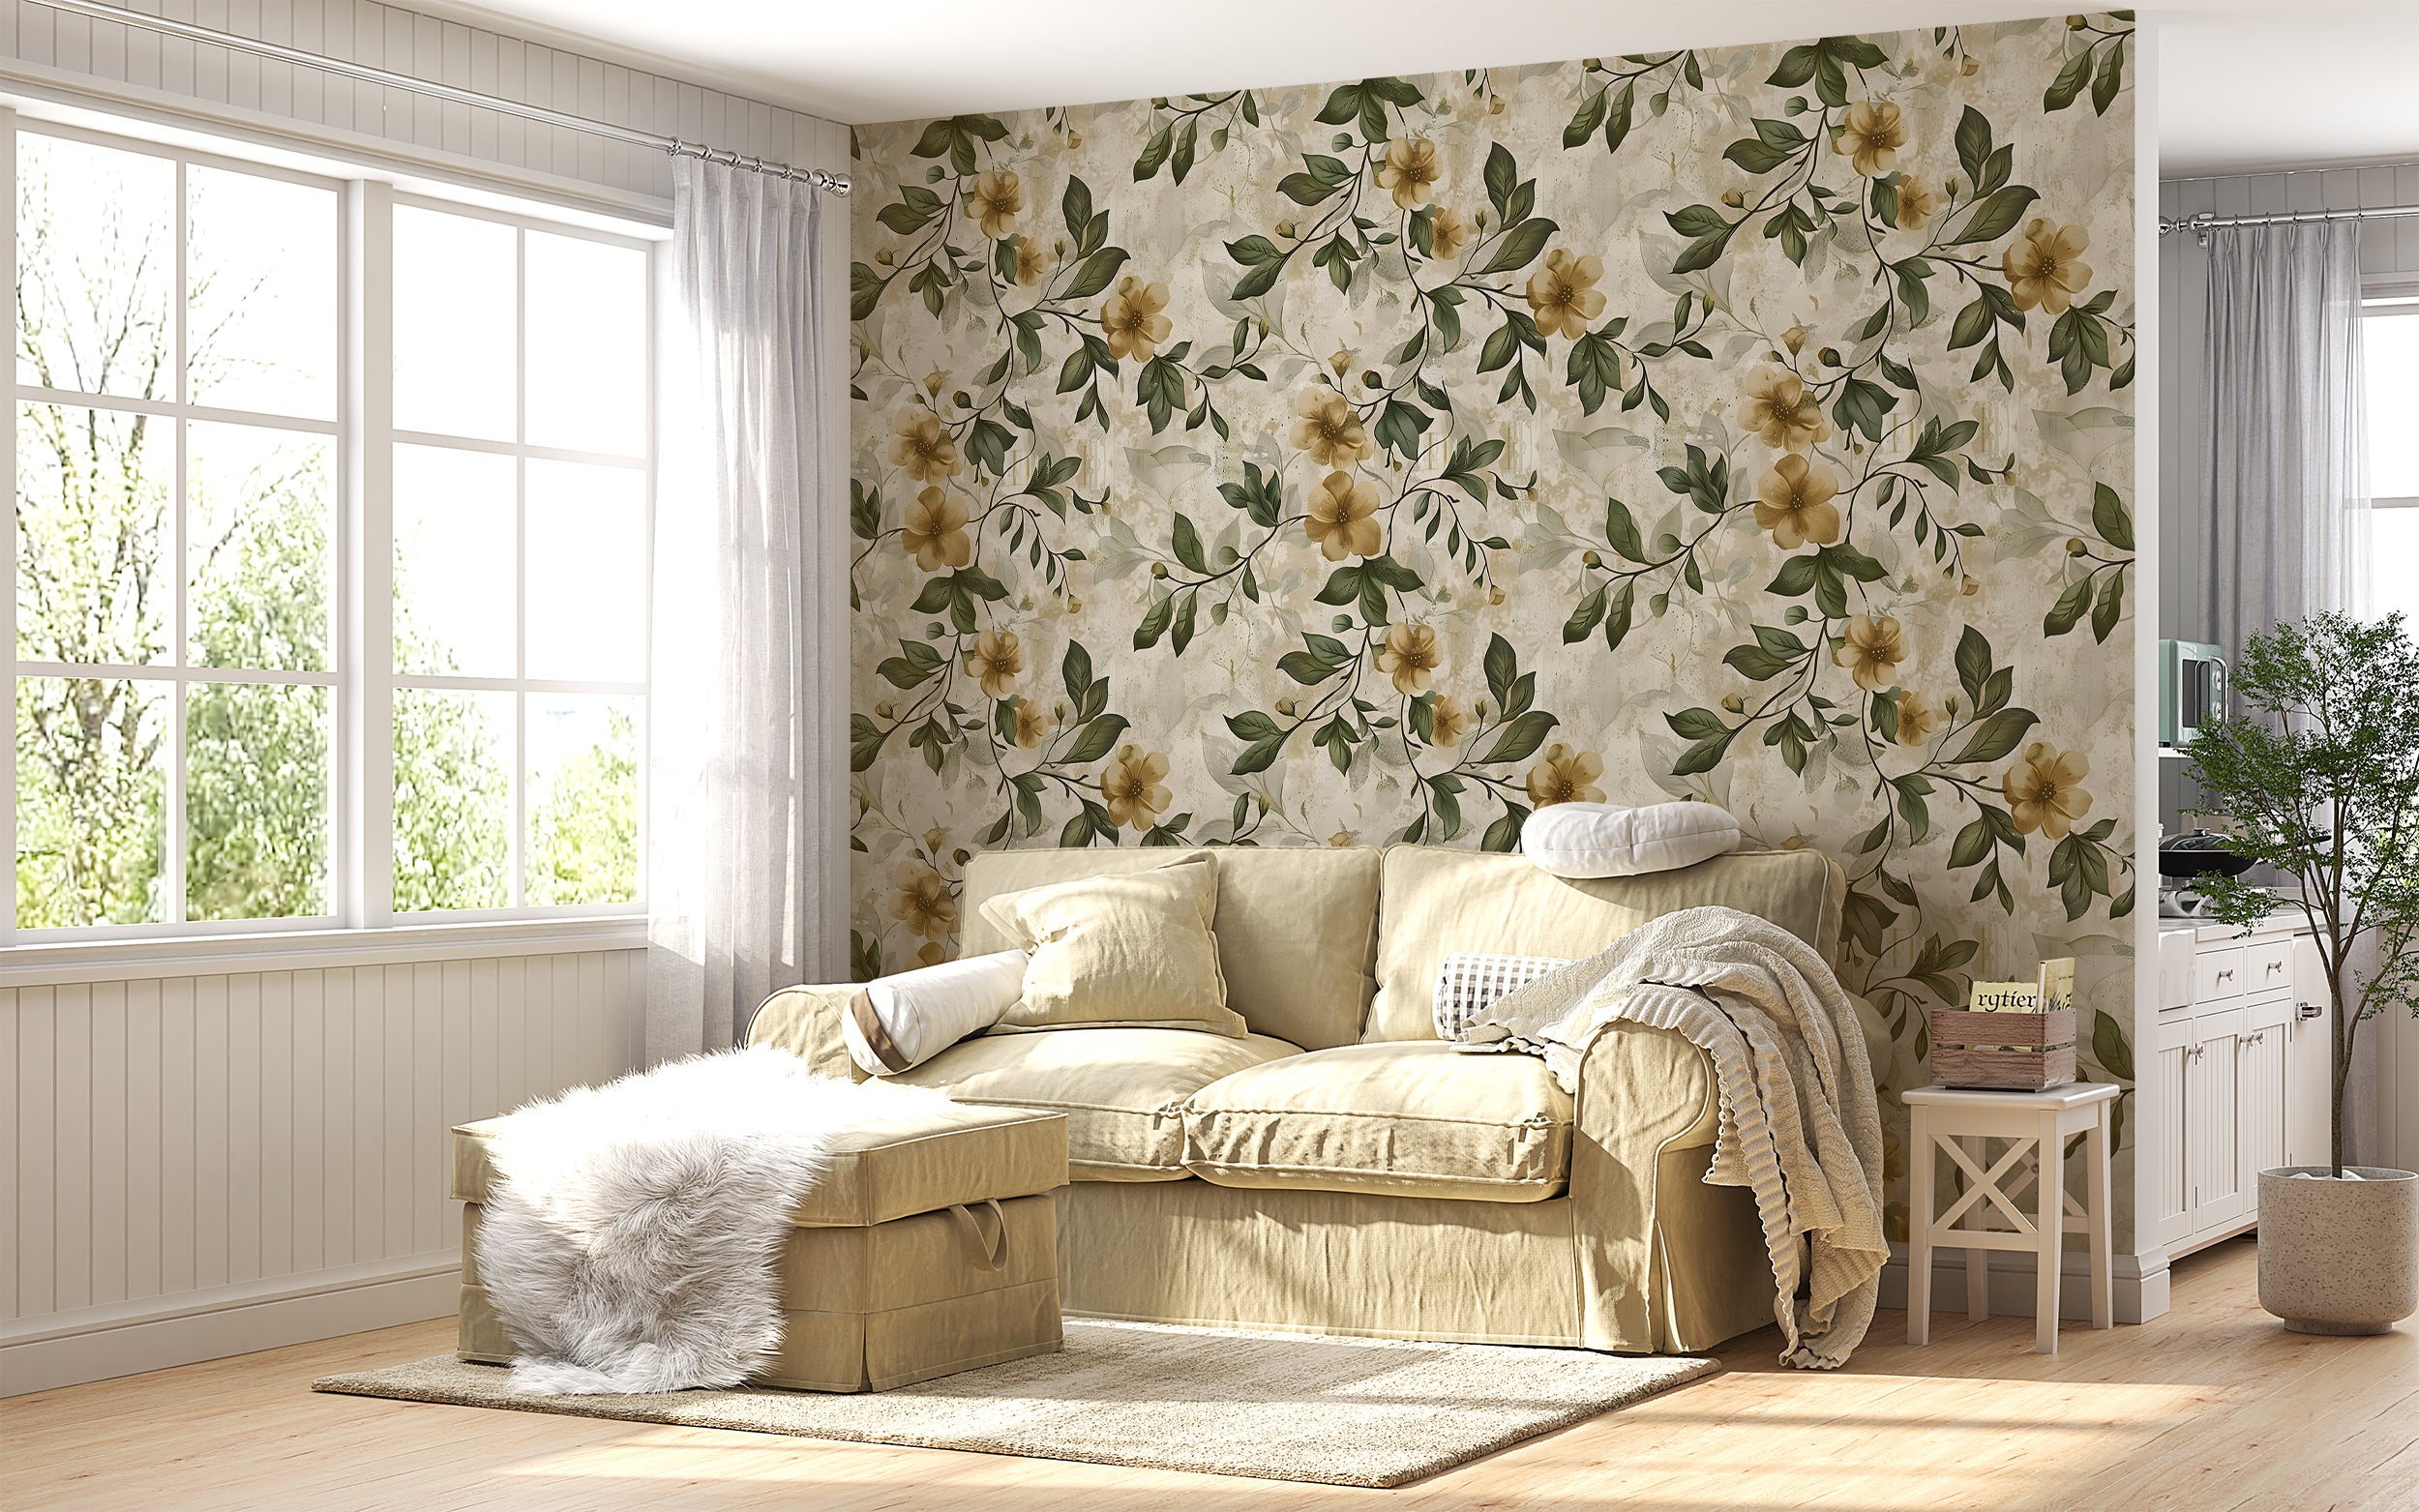 Rustic Beige and Green Floral Wallpaper, Vintage Peel and Stick Botanical Wall Decal, Removable Flowers and Leaves Old Style Wallpaper